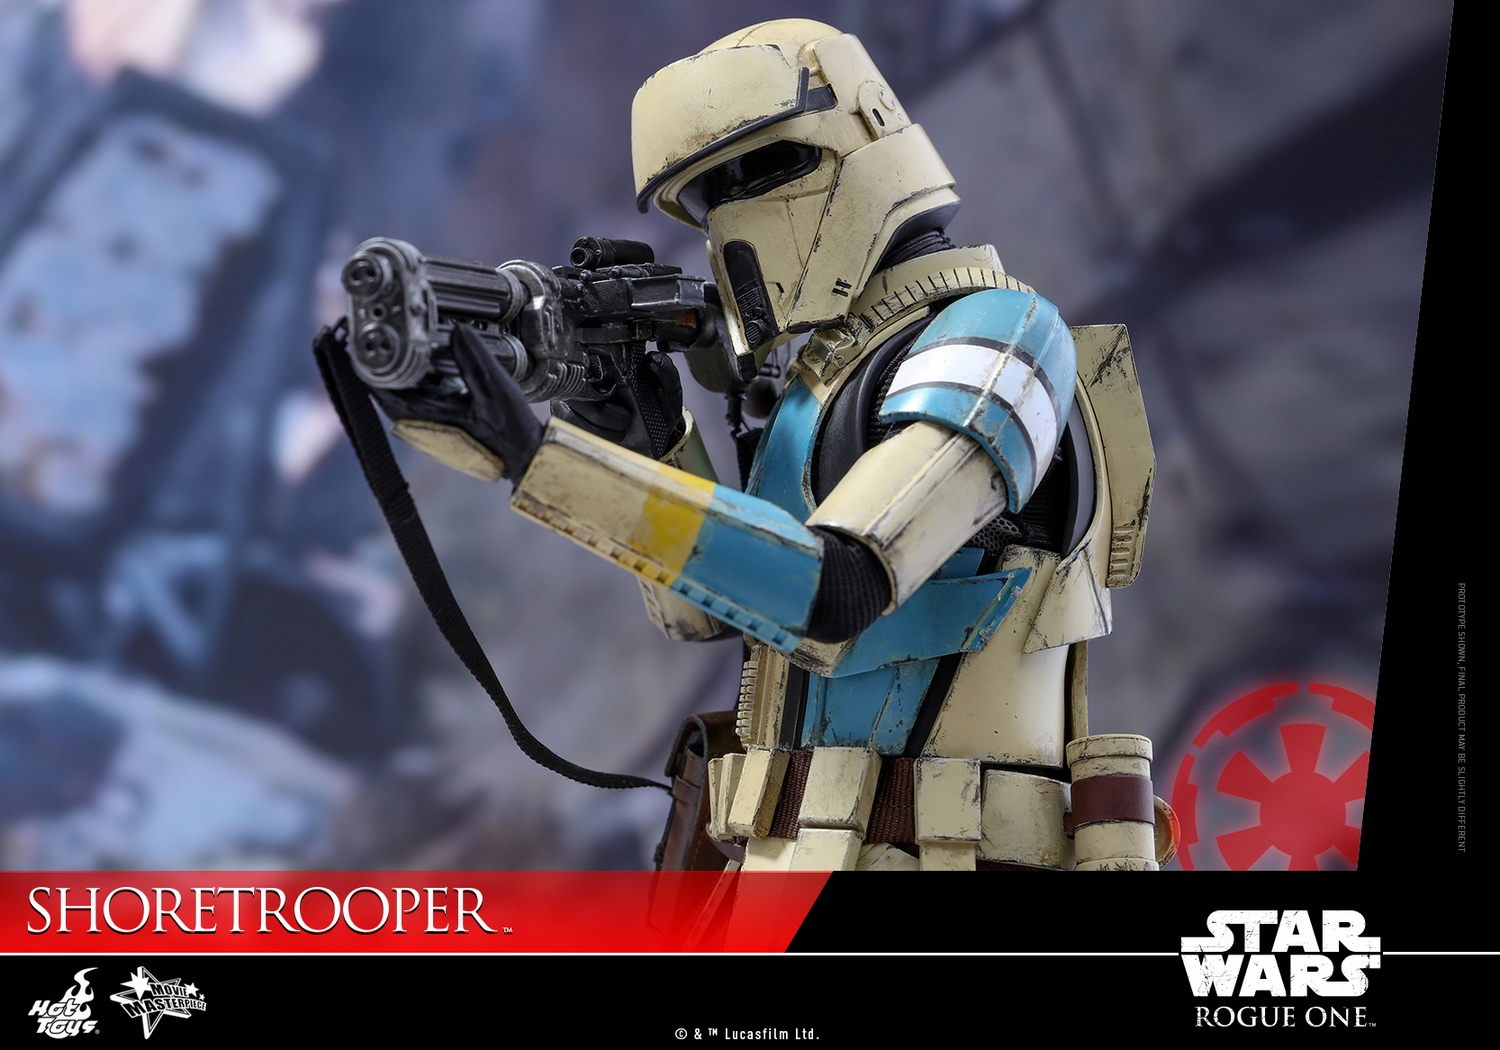 hot-toys-star-wars-rogue-one-shoretrooper-collectible-figure-092916-008.jpg